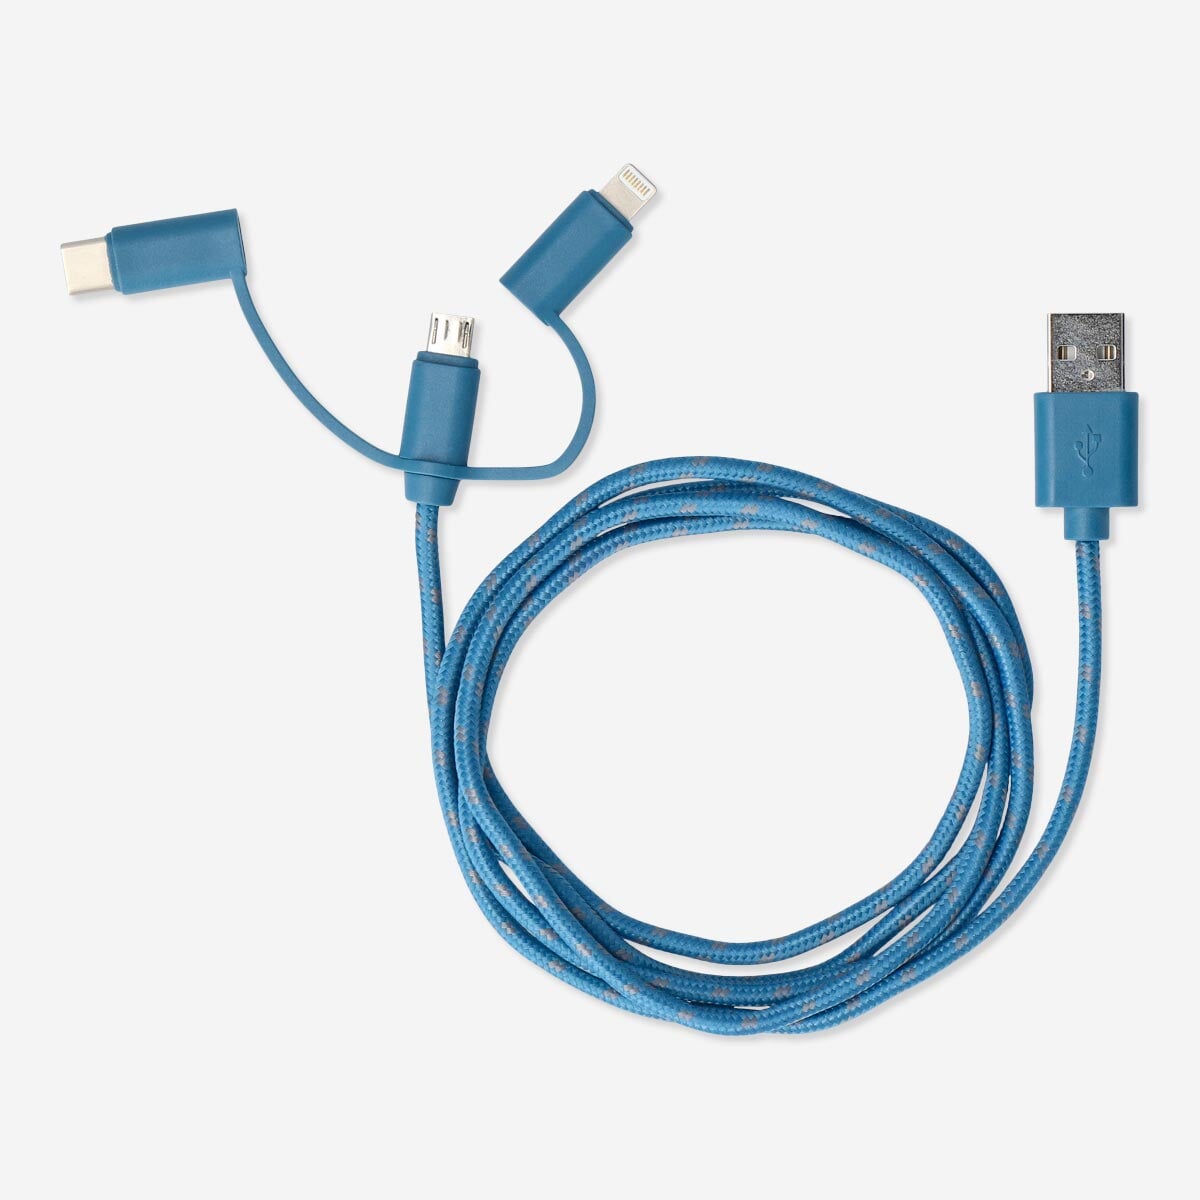 Charging cable. For USB-C, Micro USB and €6| Flying Tiger Copenhagen